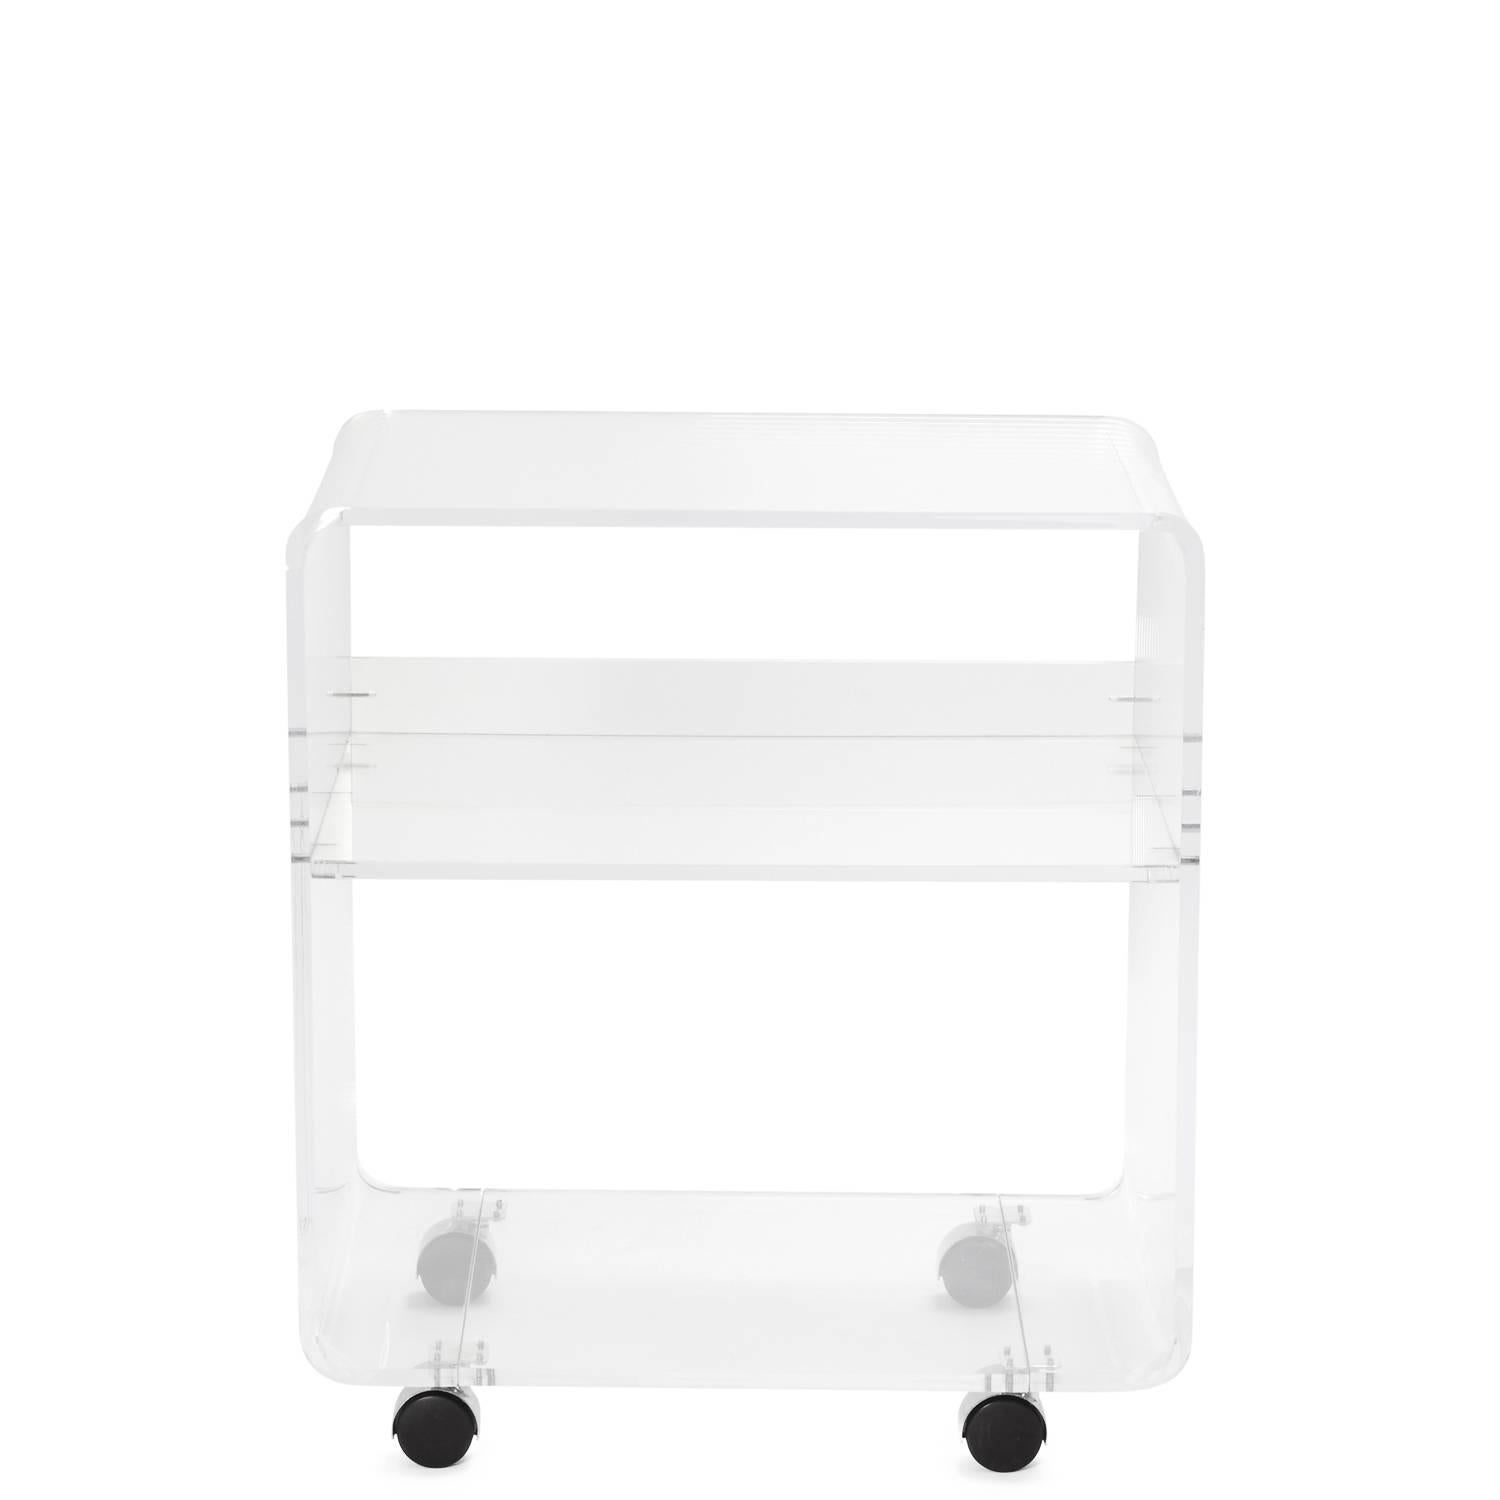 Waterfall Lucite bar cart with chrome details, includes middle shelf and four rolling casters.